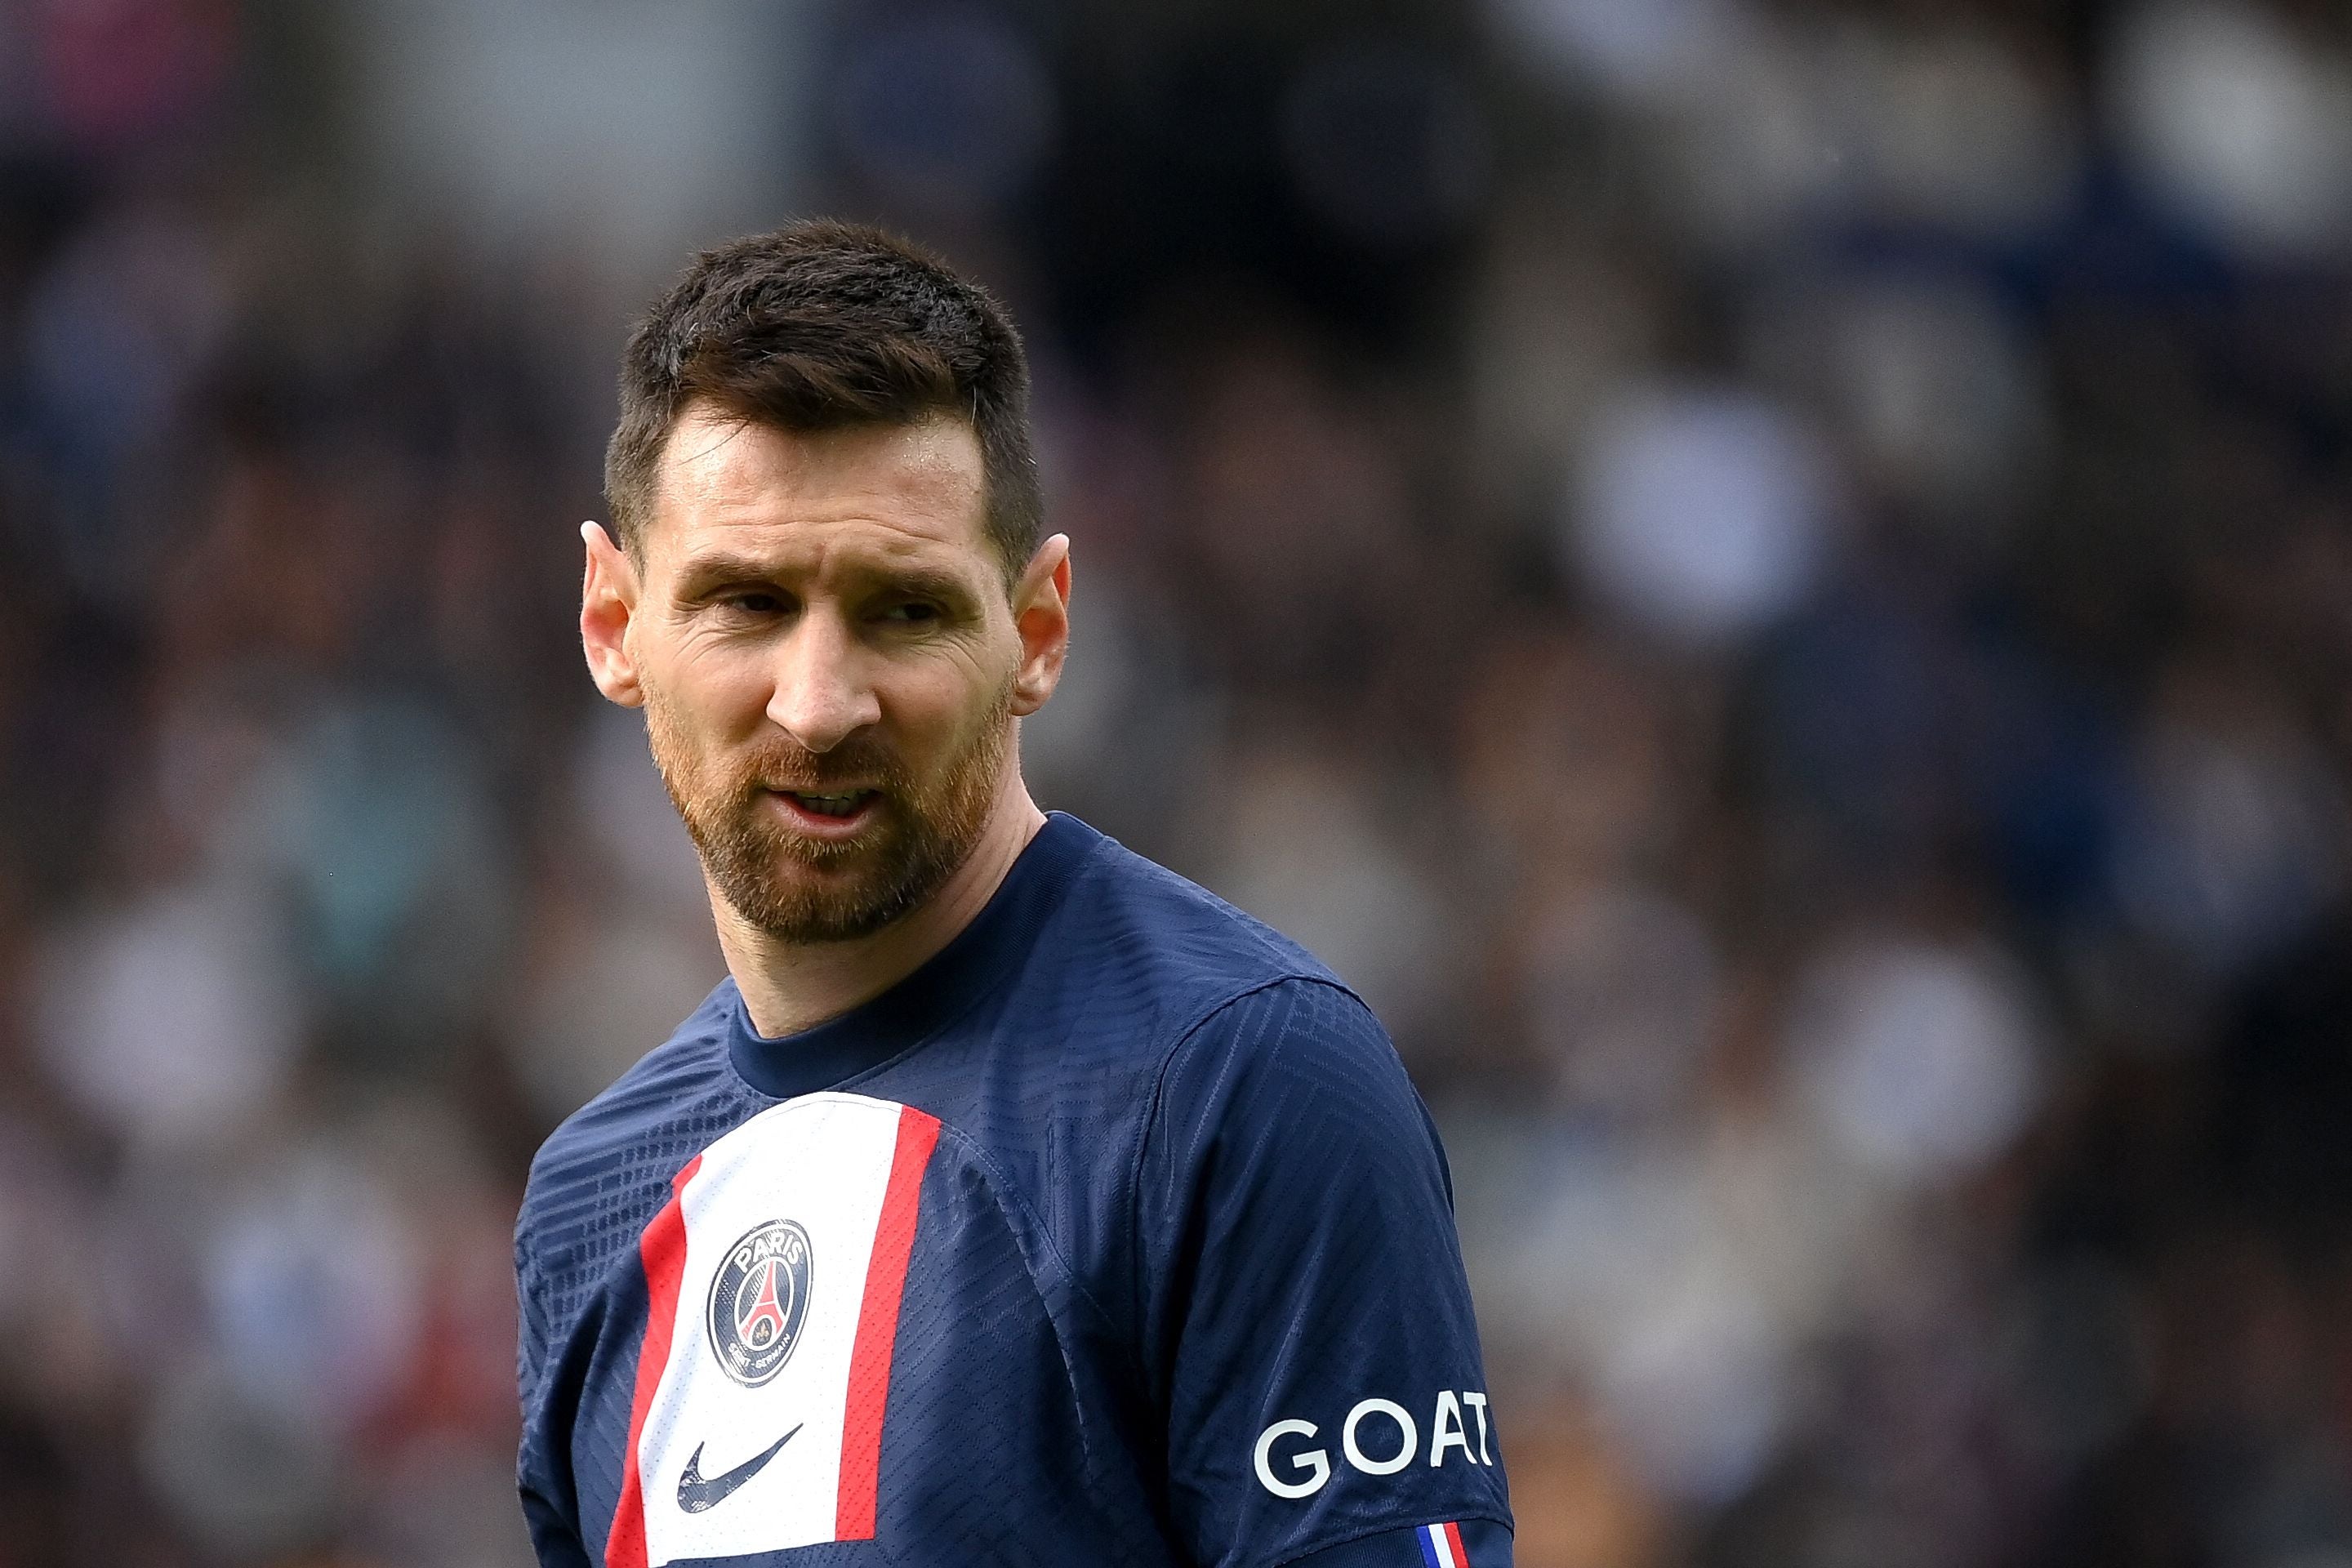 Psg Suspend Lionel Messi For Two Weeks Over Unauthorised Trip To Saudi Arabia The Independent